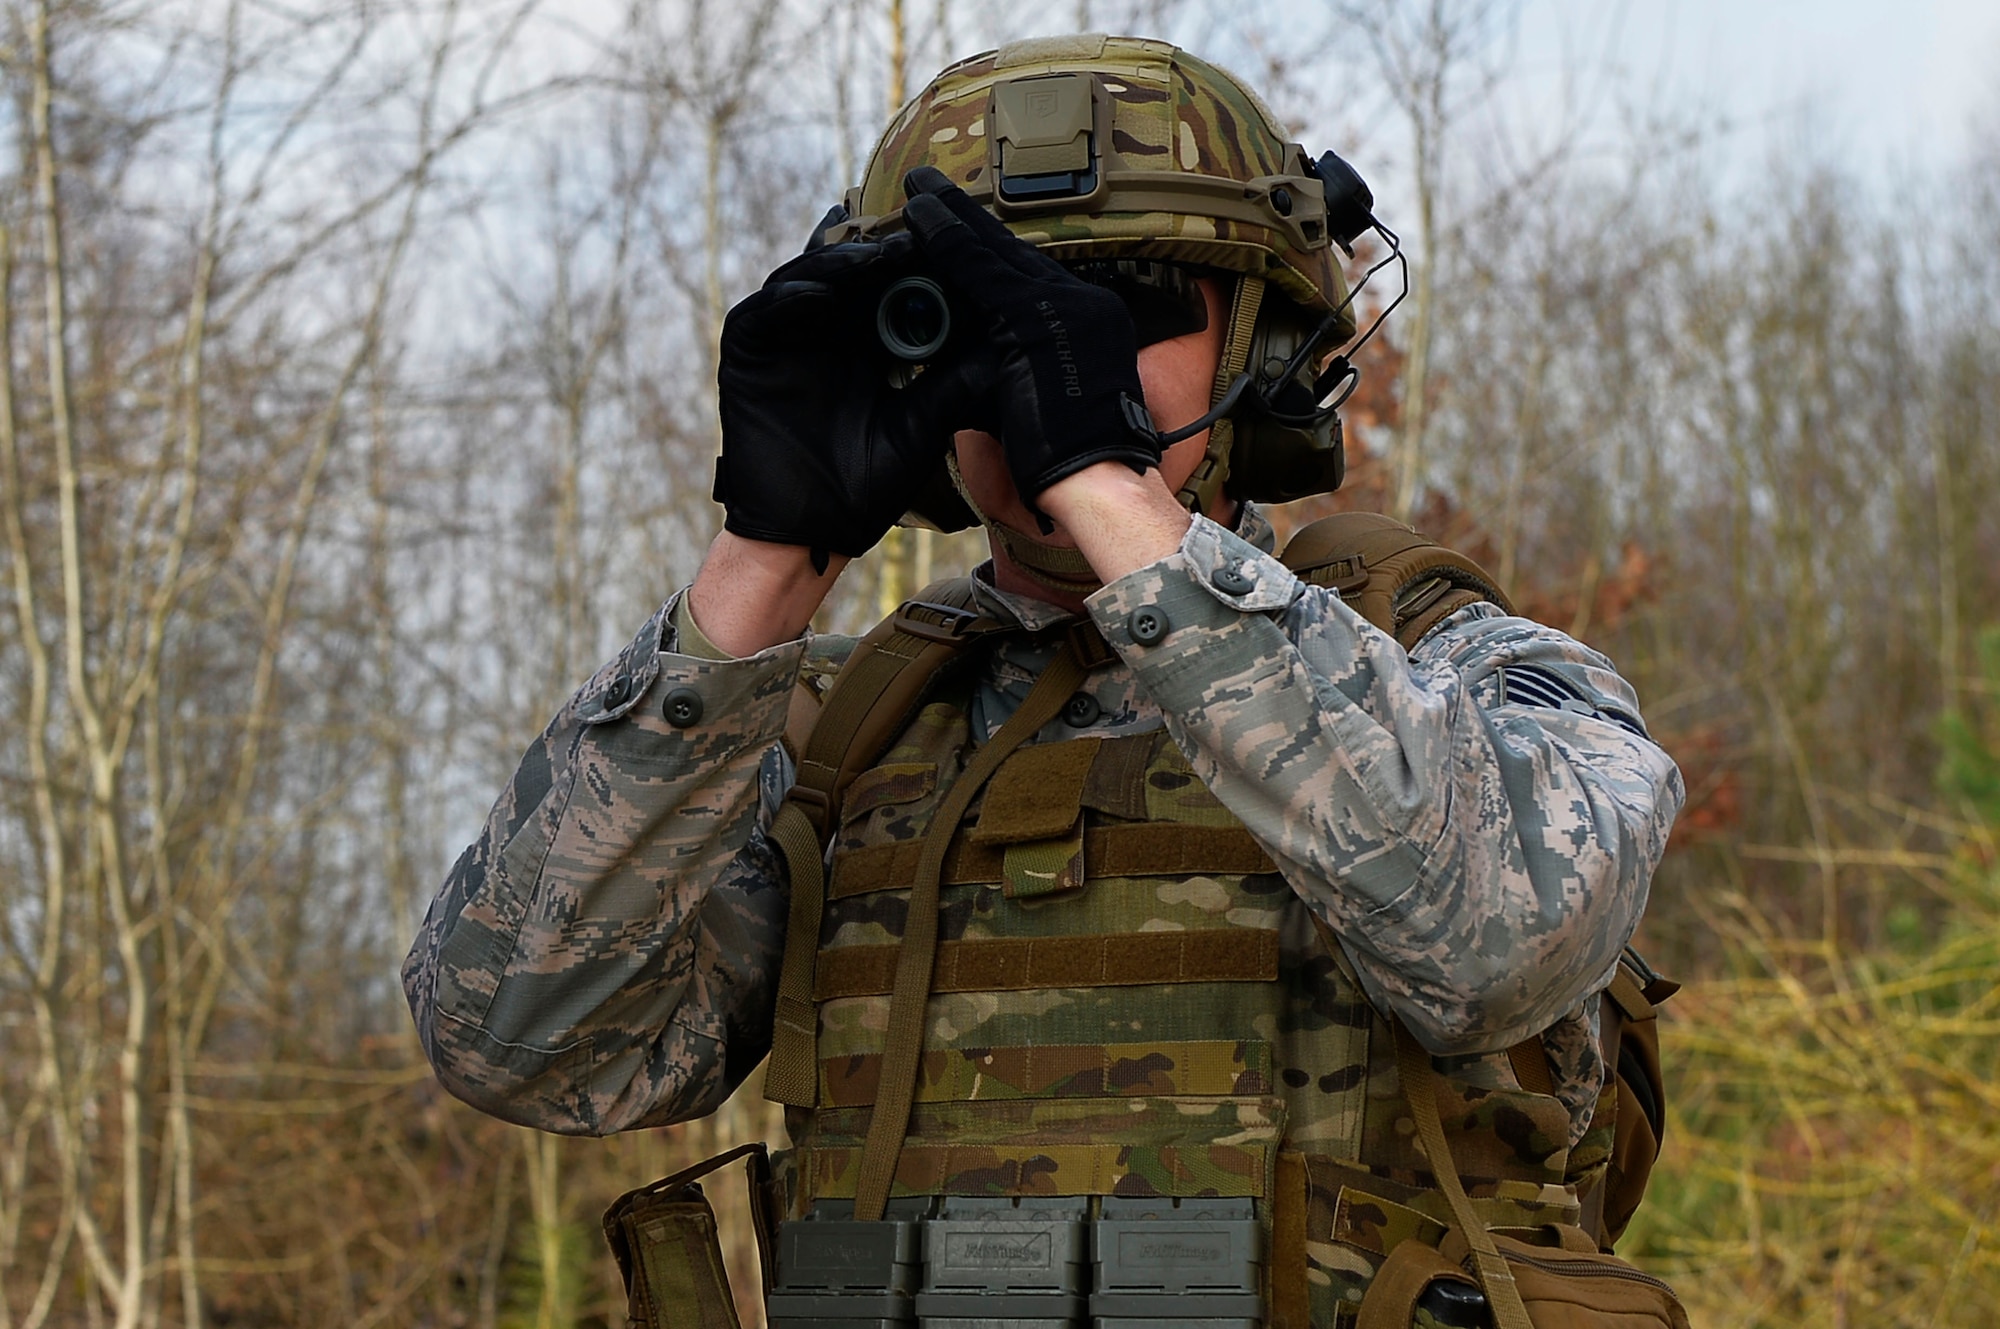 Tech. Sgt. Aaron Carroll, 786th Civil Engineer Squadron NCO in charge if explosive ordnance supply, looks through a monocular during an exercise on Ramstein Air Base, Germany, March 23, 2017. 2017 Marked the first time in nine years EOD was included in the Silver Flag curriculum at Ramstein. The 435th Contingency Response Group holds the exercise year-round. (U.S. Air Force photo by Airman 1st Class Joshua Magbanua)